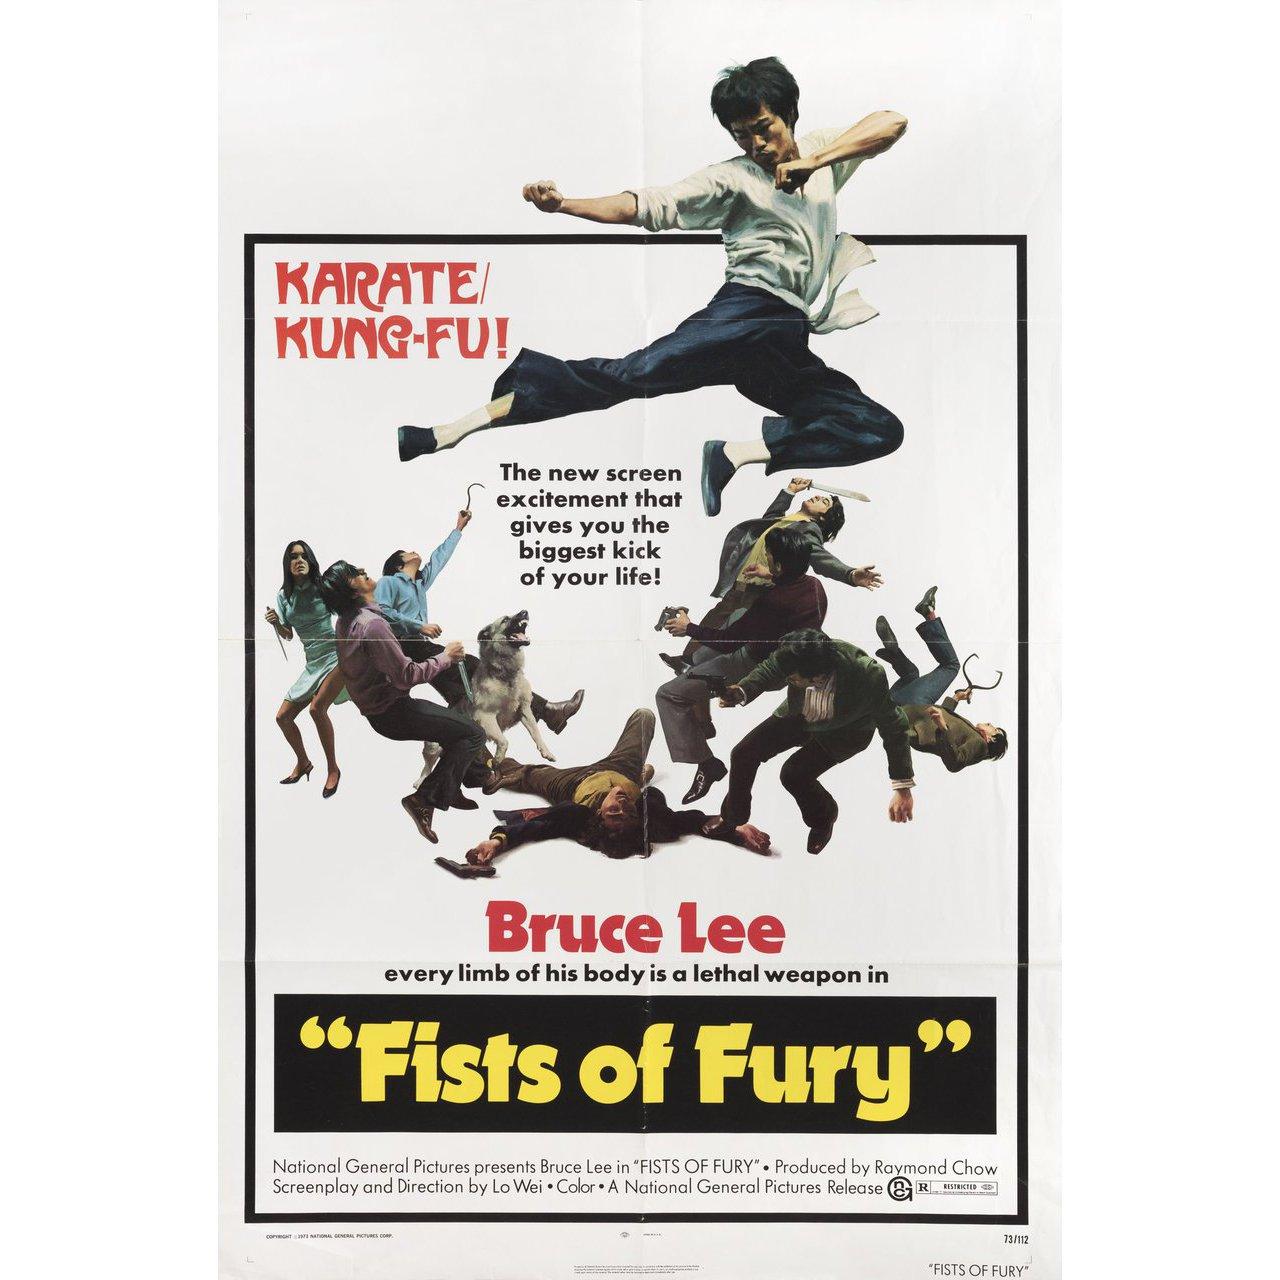 Original 1973 U.S. one sheet poster for the film The Big Boss (Fists of Fury) directed by Wei Lo / Chia-hsiang Wu with Bruce Lee / Maria Yi / James Tien / Marilyn Bautista. Very Good-Fine condition, folded with pinholes in corners. Many original